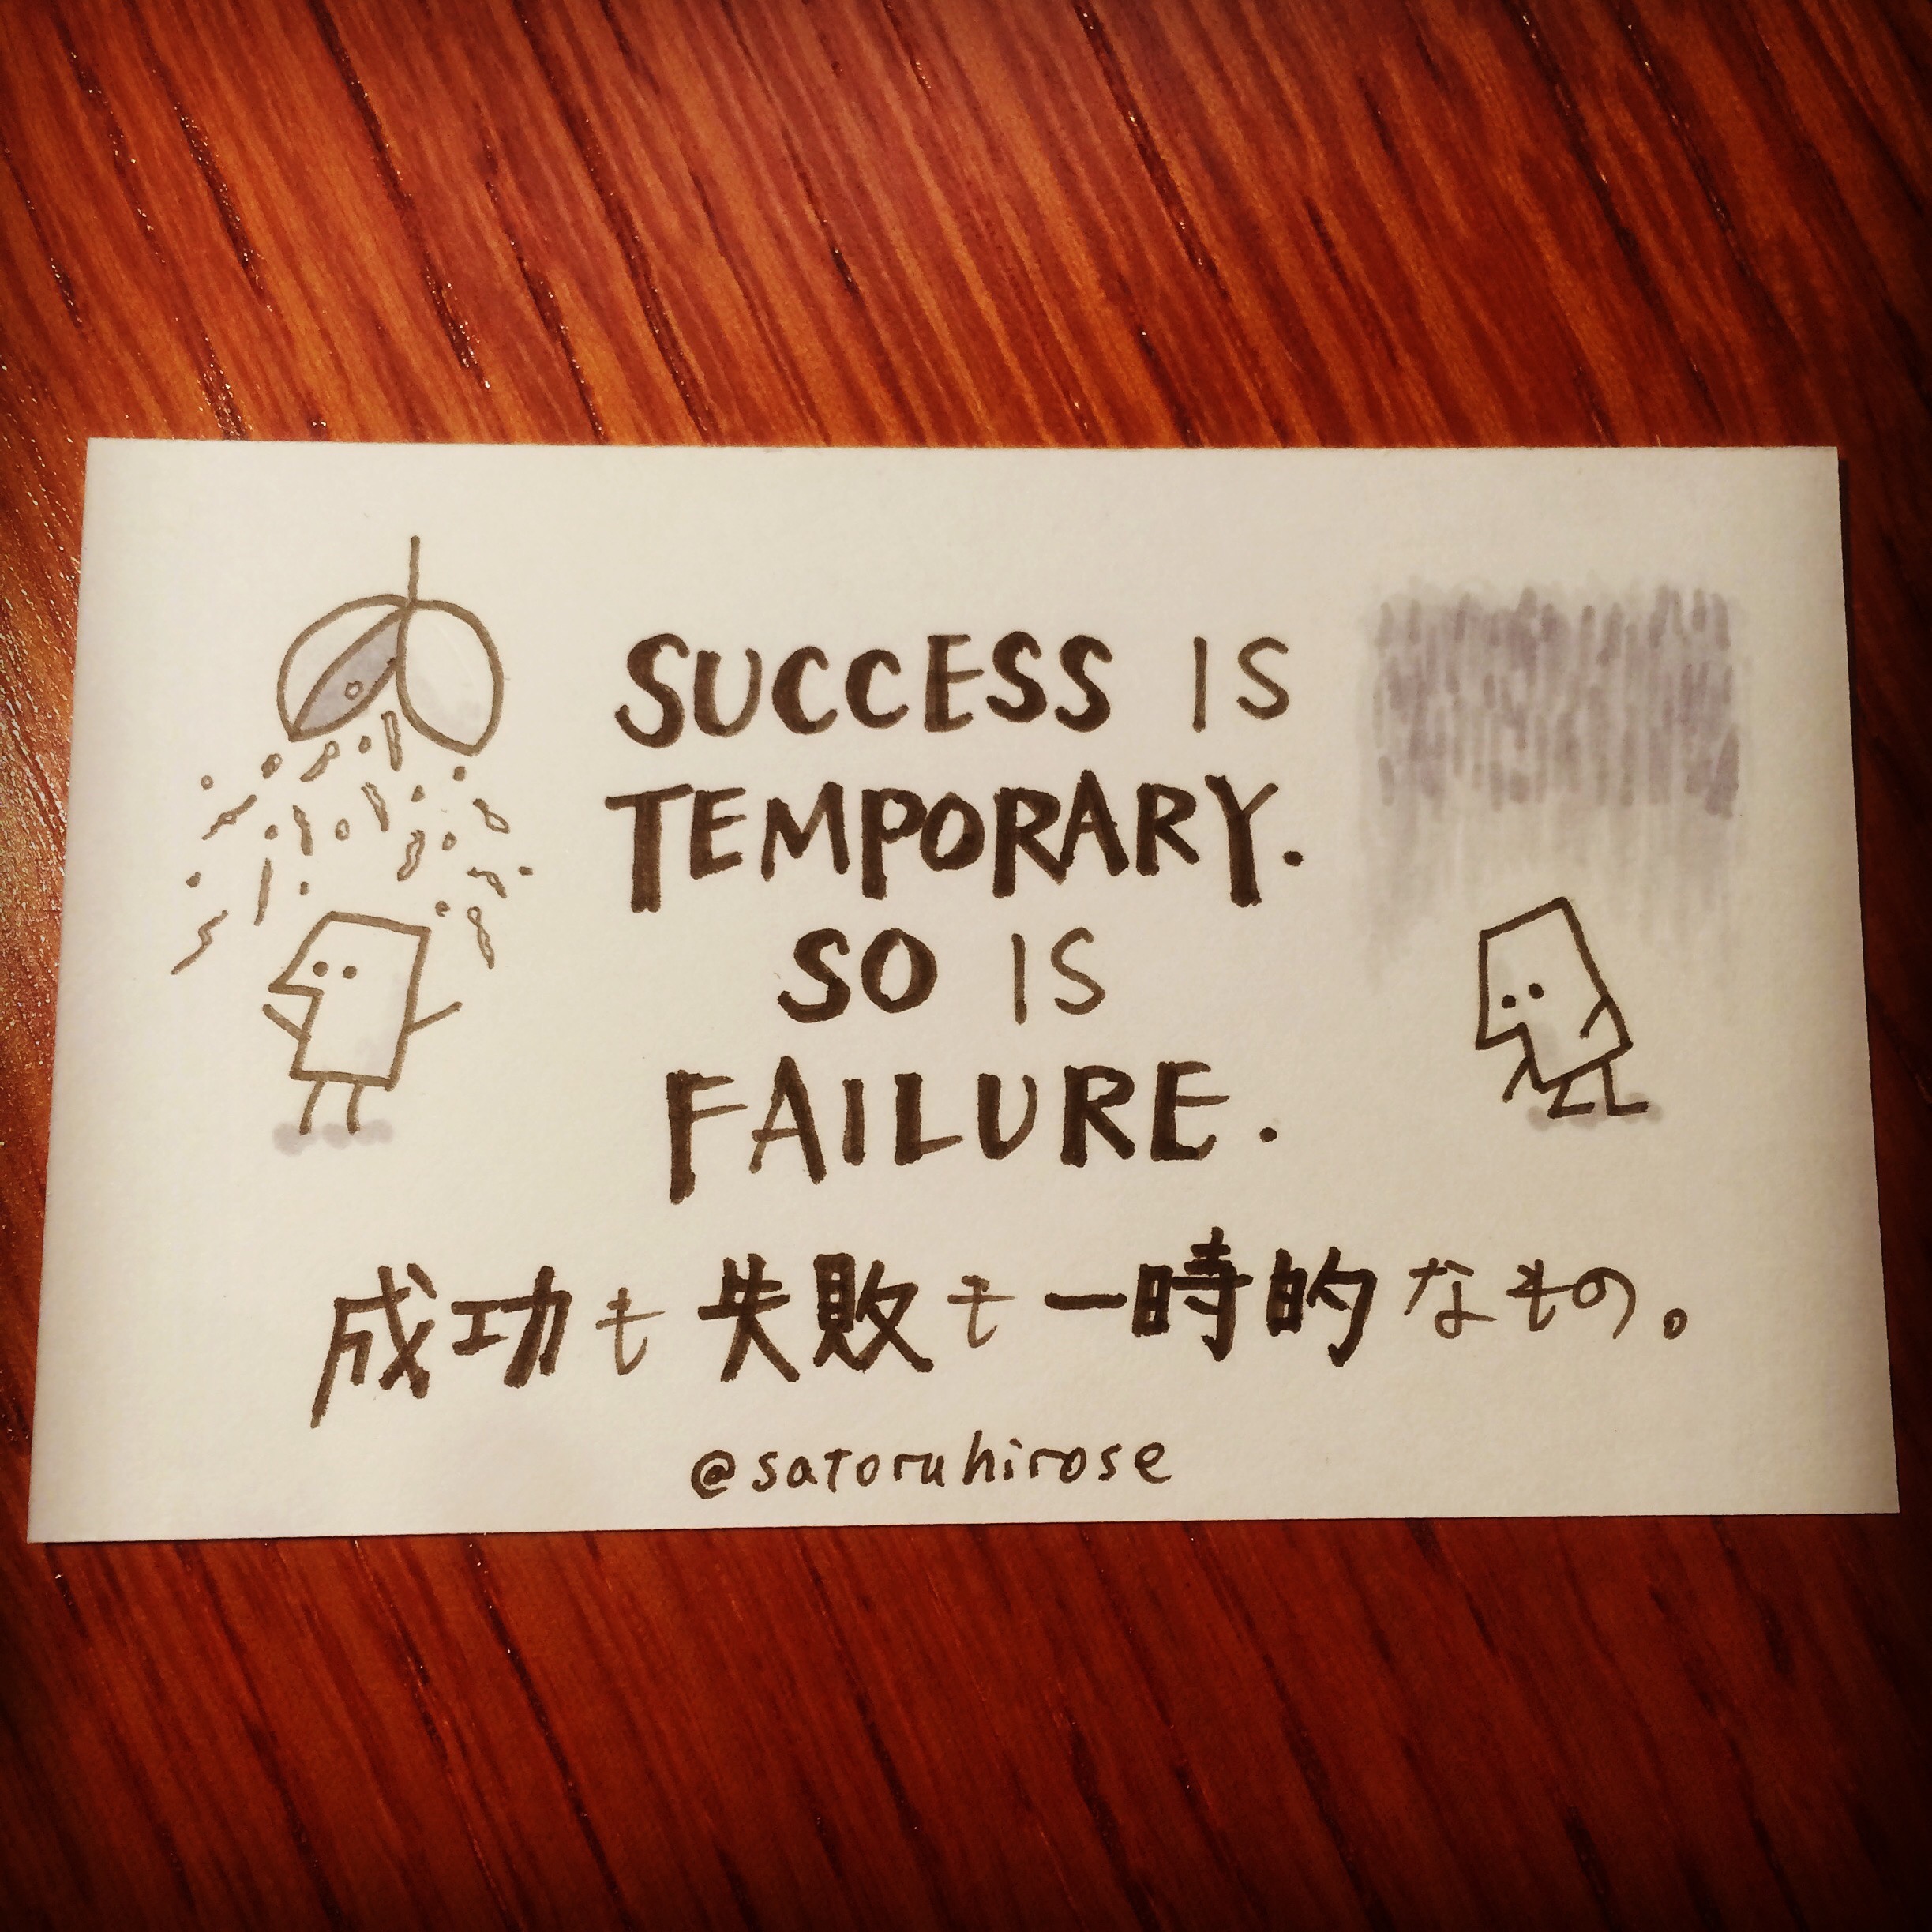 Success is temporary. So is failure.